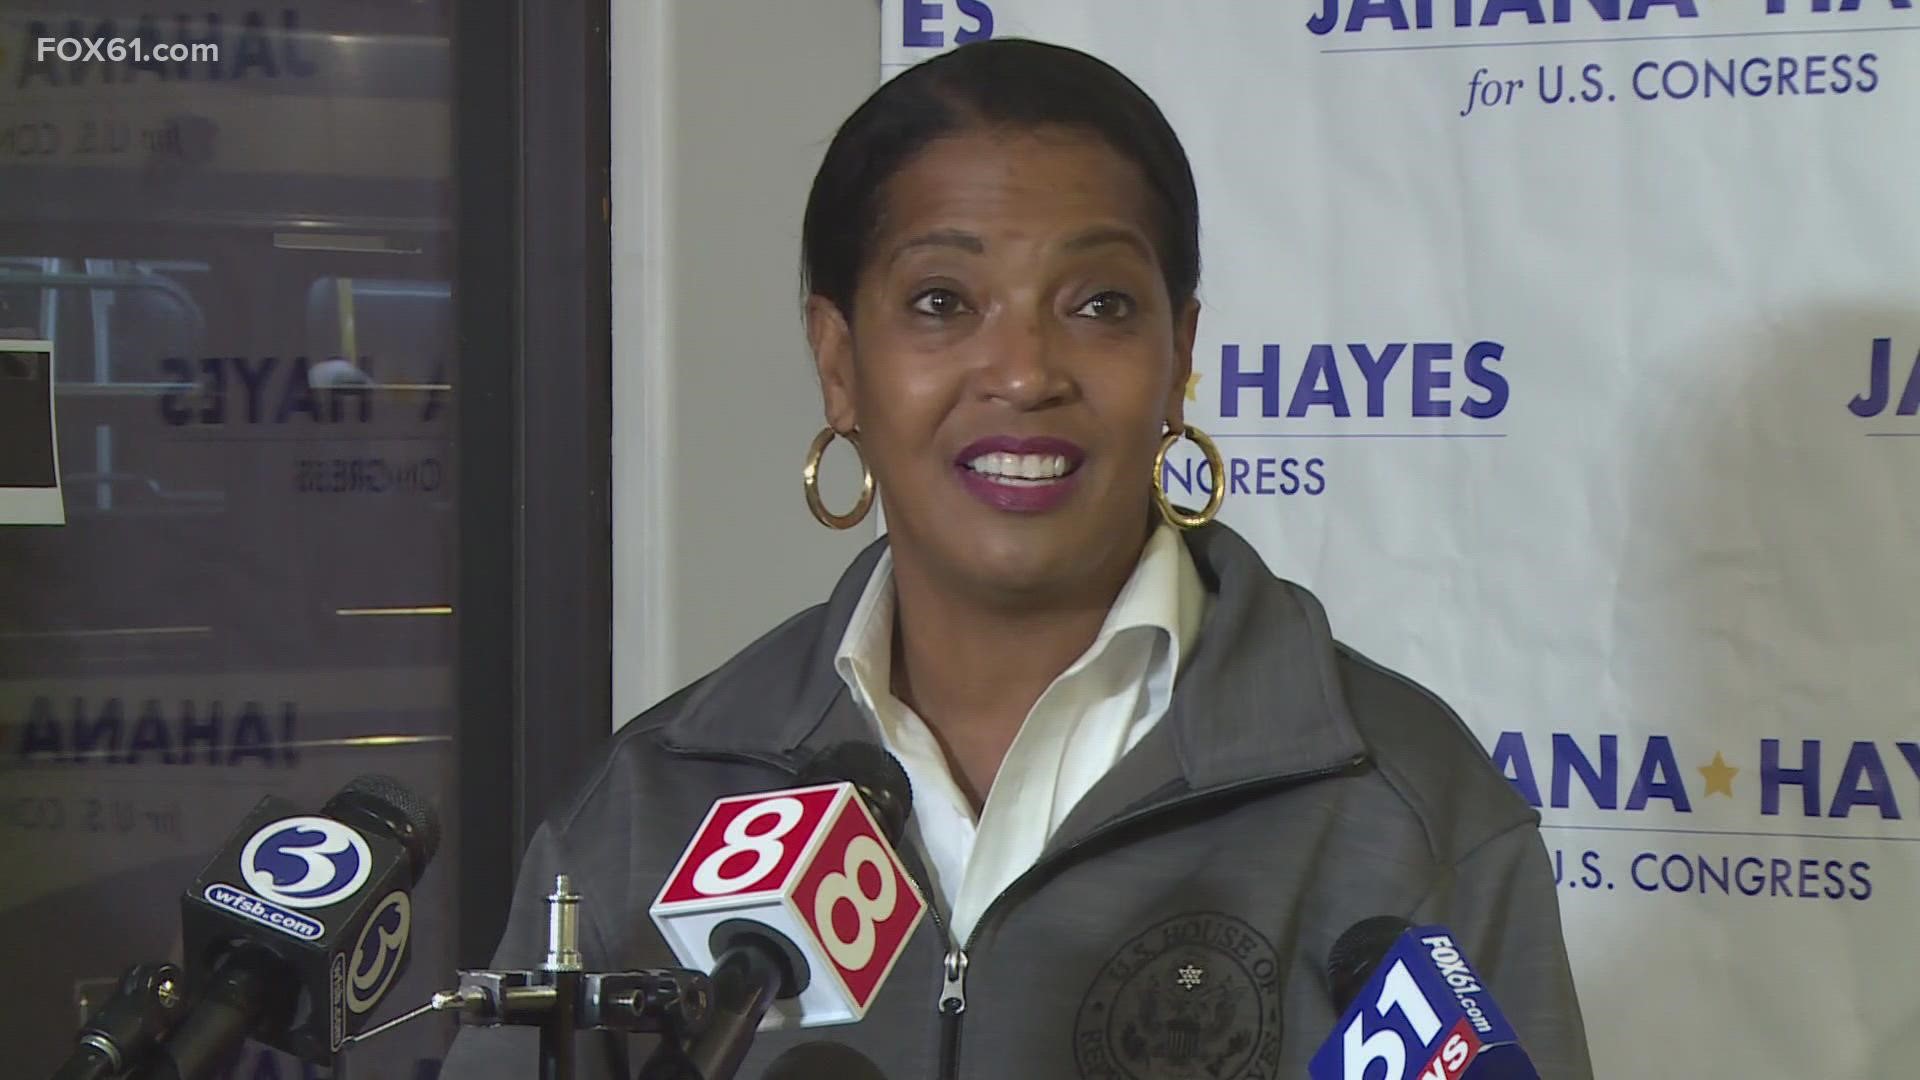 The Associated Press confirmed the victory for Hayes over her opponent George Logan after she'd declared victory.